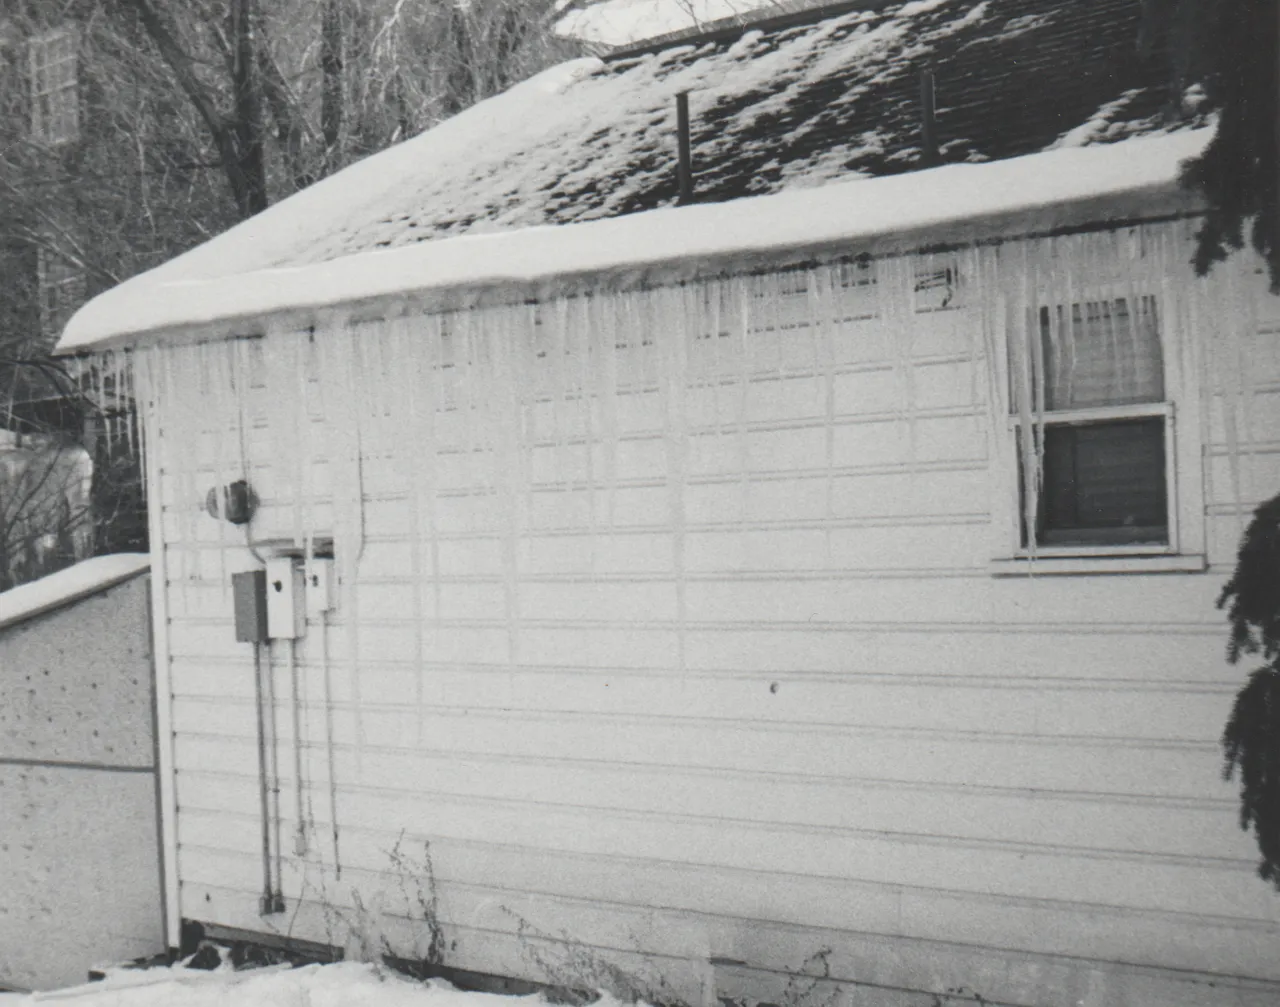 1975-01-15 - Wednesday - Snow and ice on the side of the house, 1pic.png